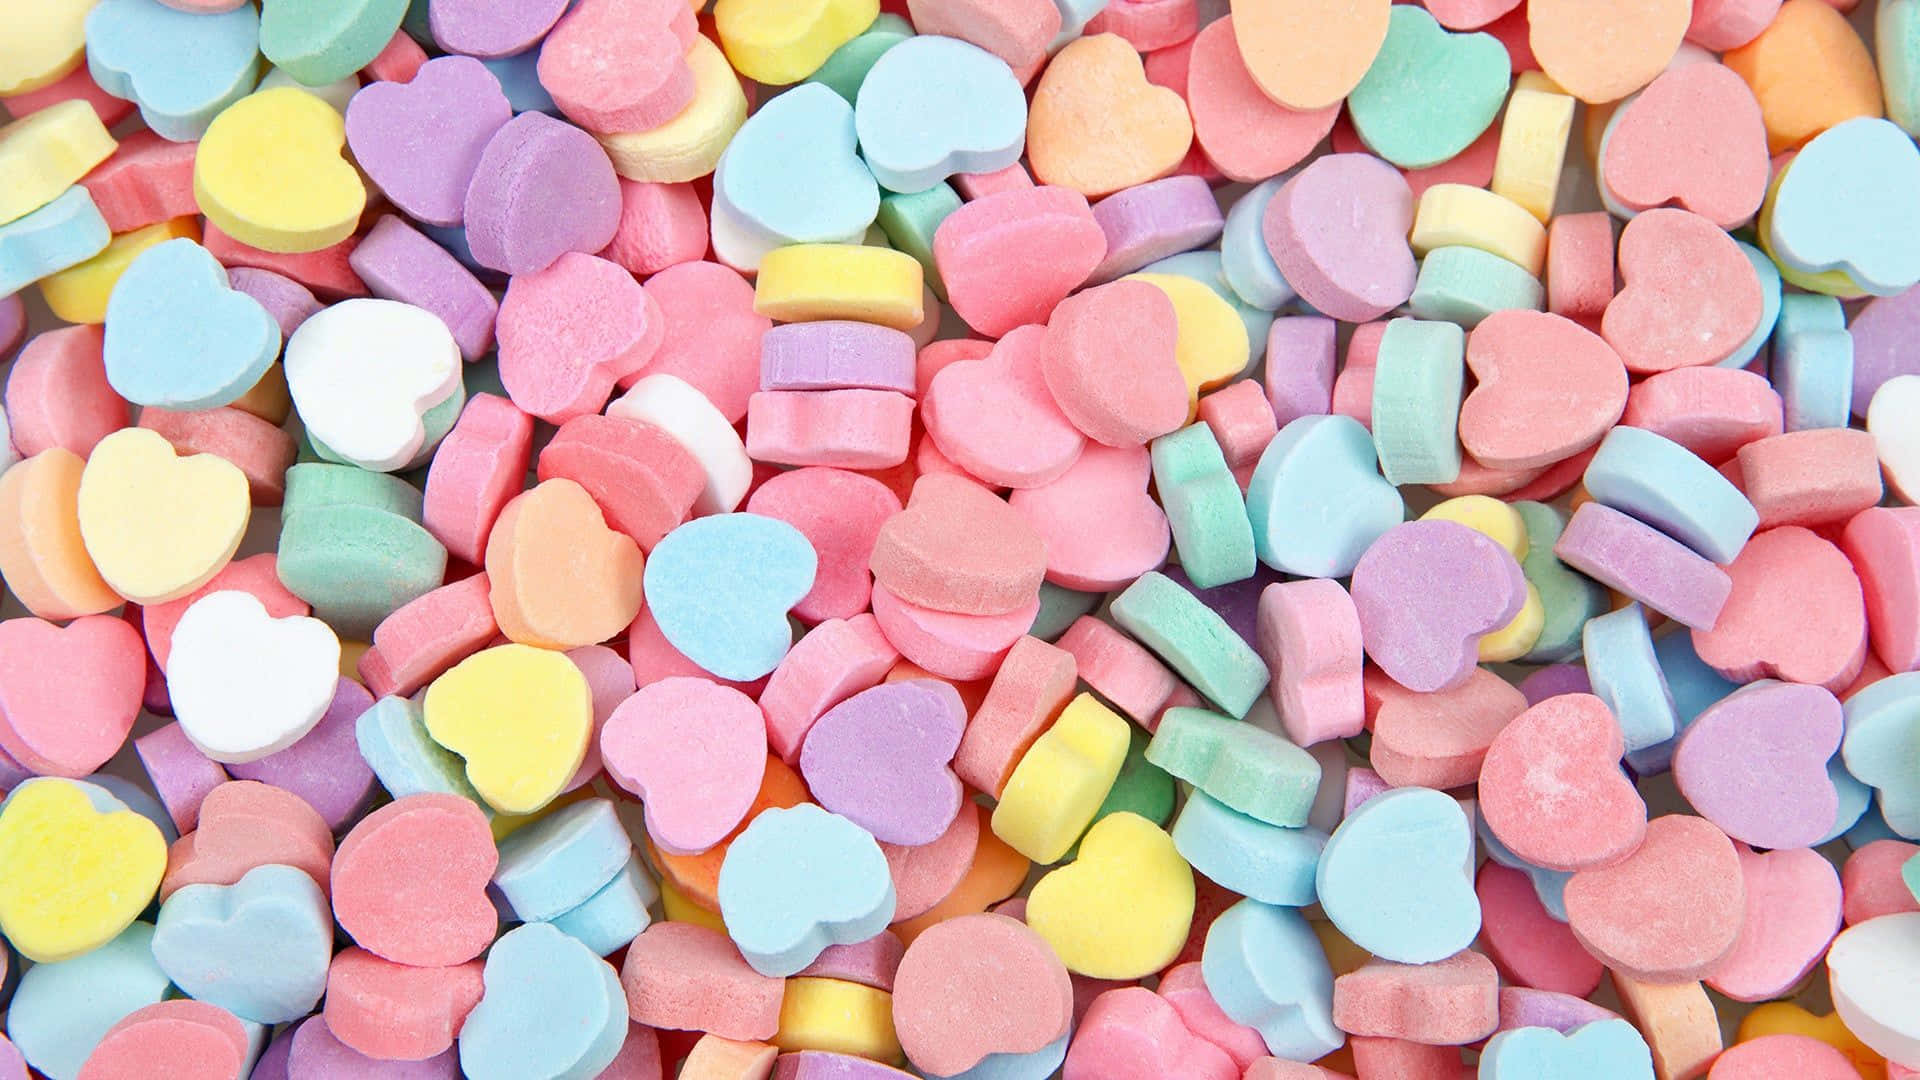 A Pile Of Candy Hearts In Different Colors